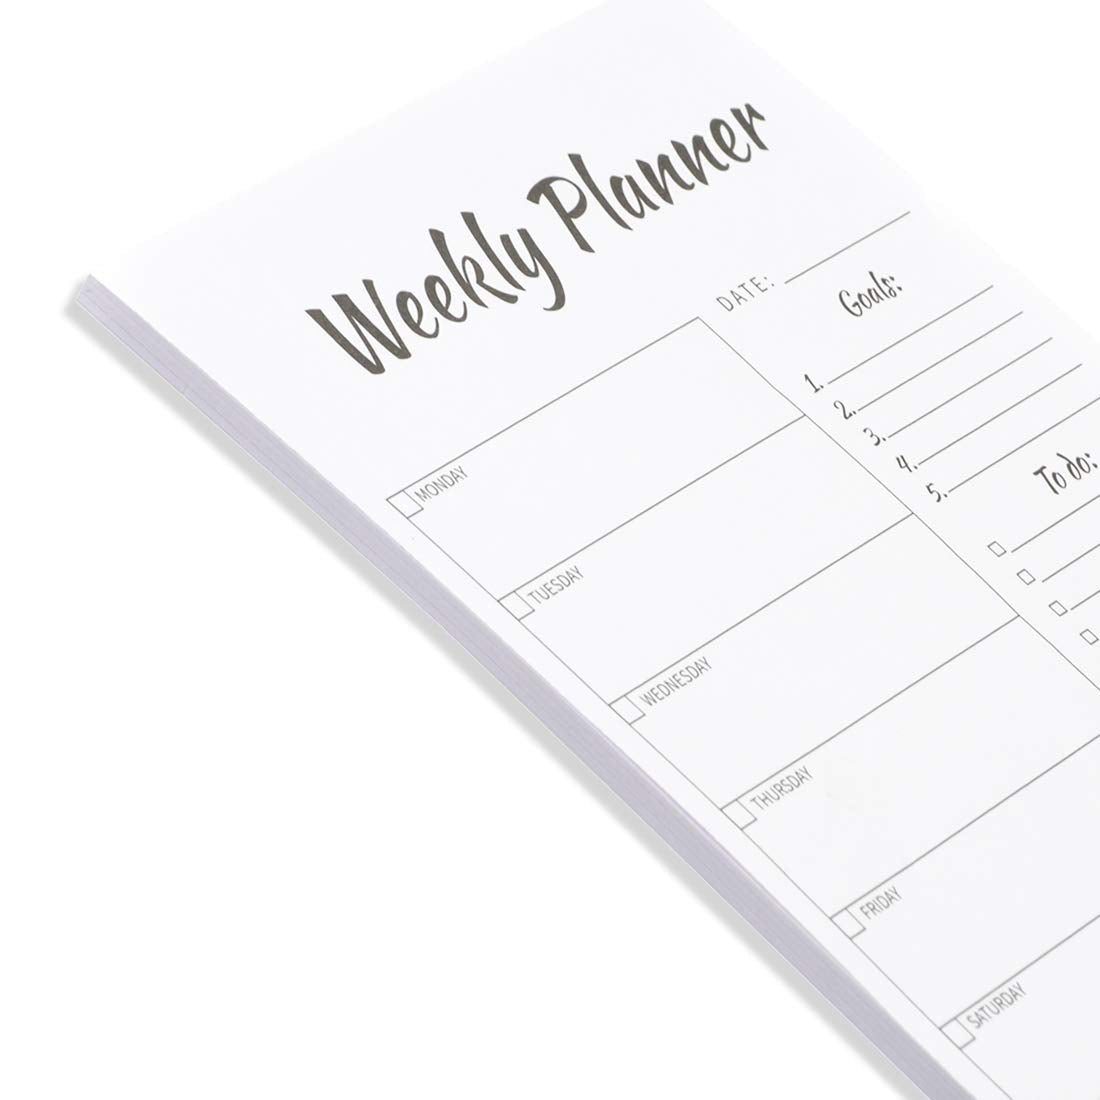 Weekly Planner | Goal Planner | to DO List Gift for Students & Teachers Pack of 2 Note Pads